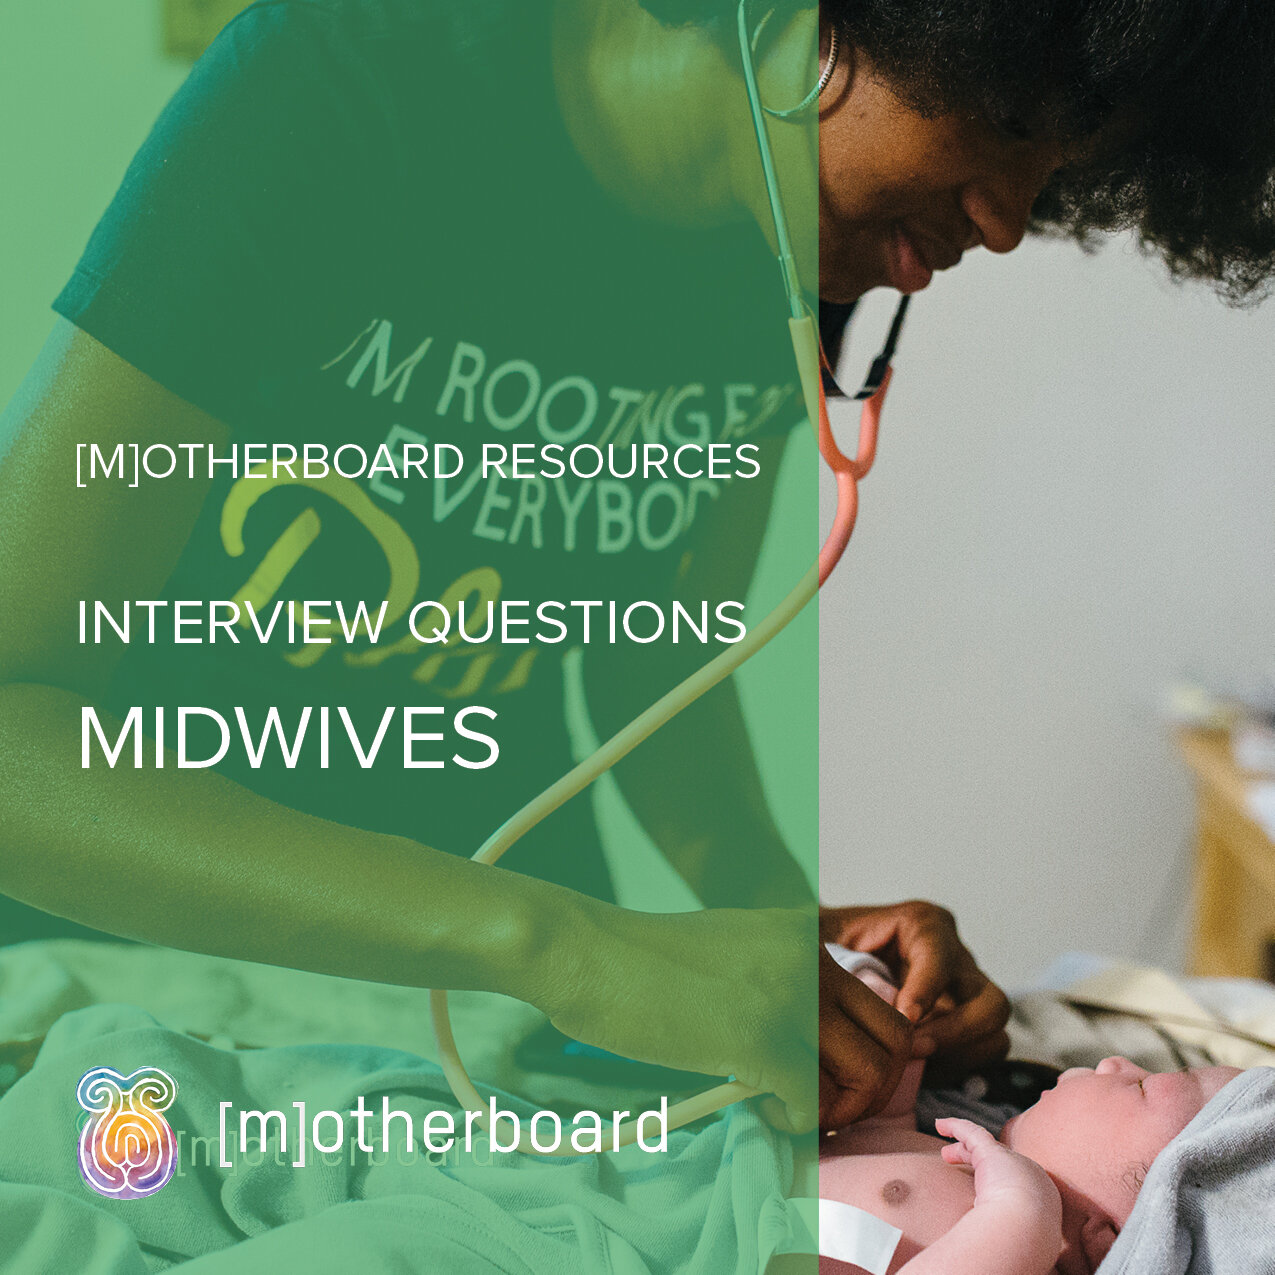 INTERVIEWING MIDWIVES